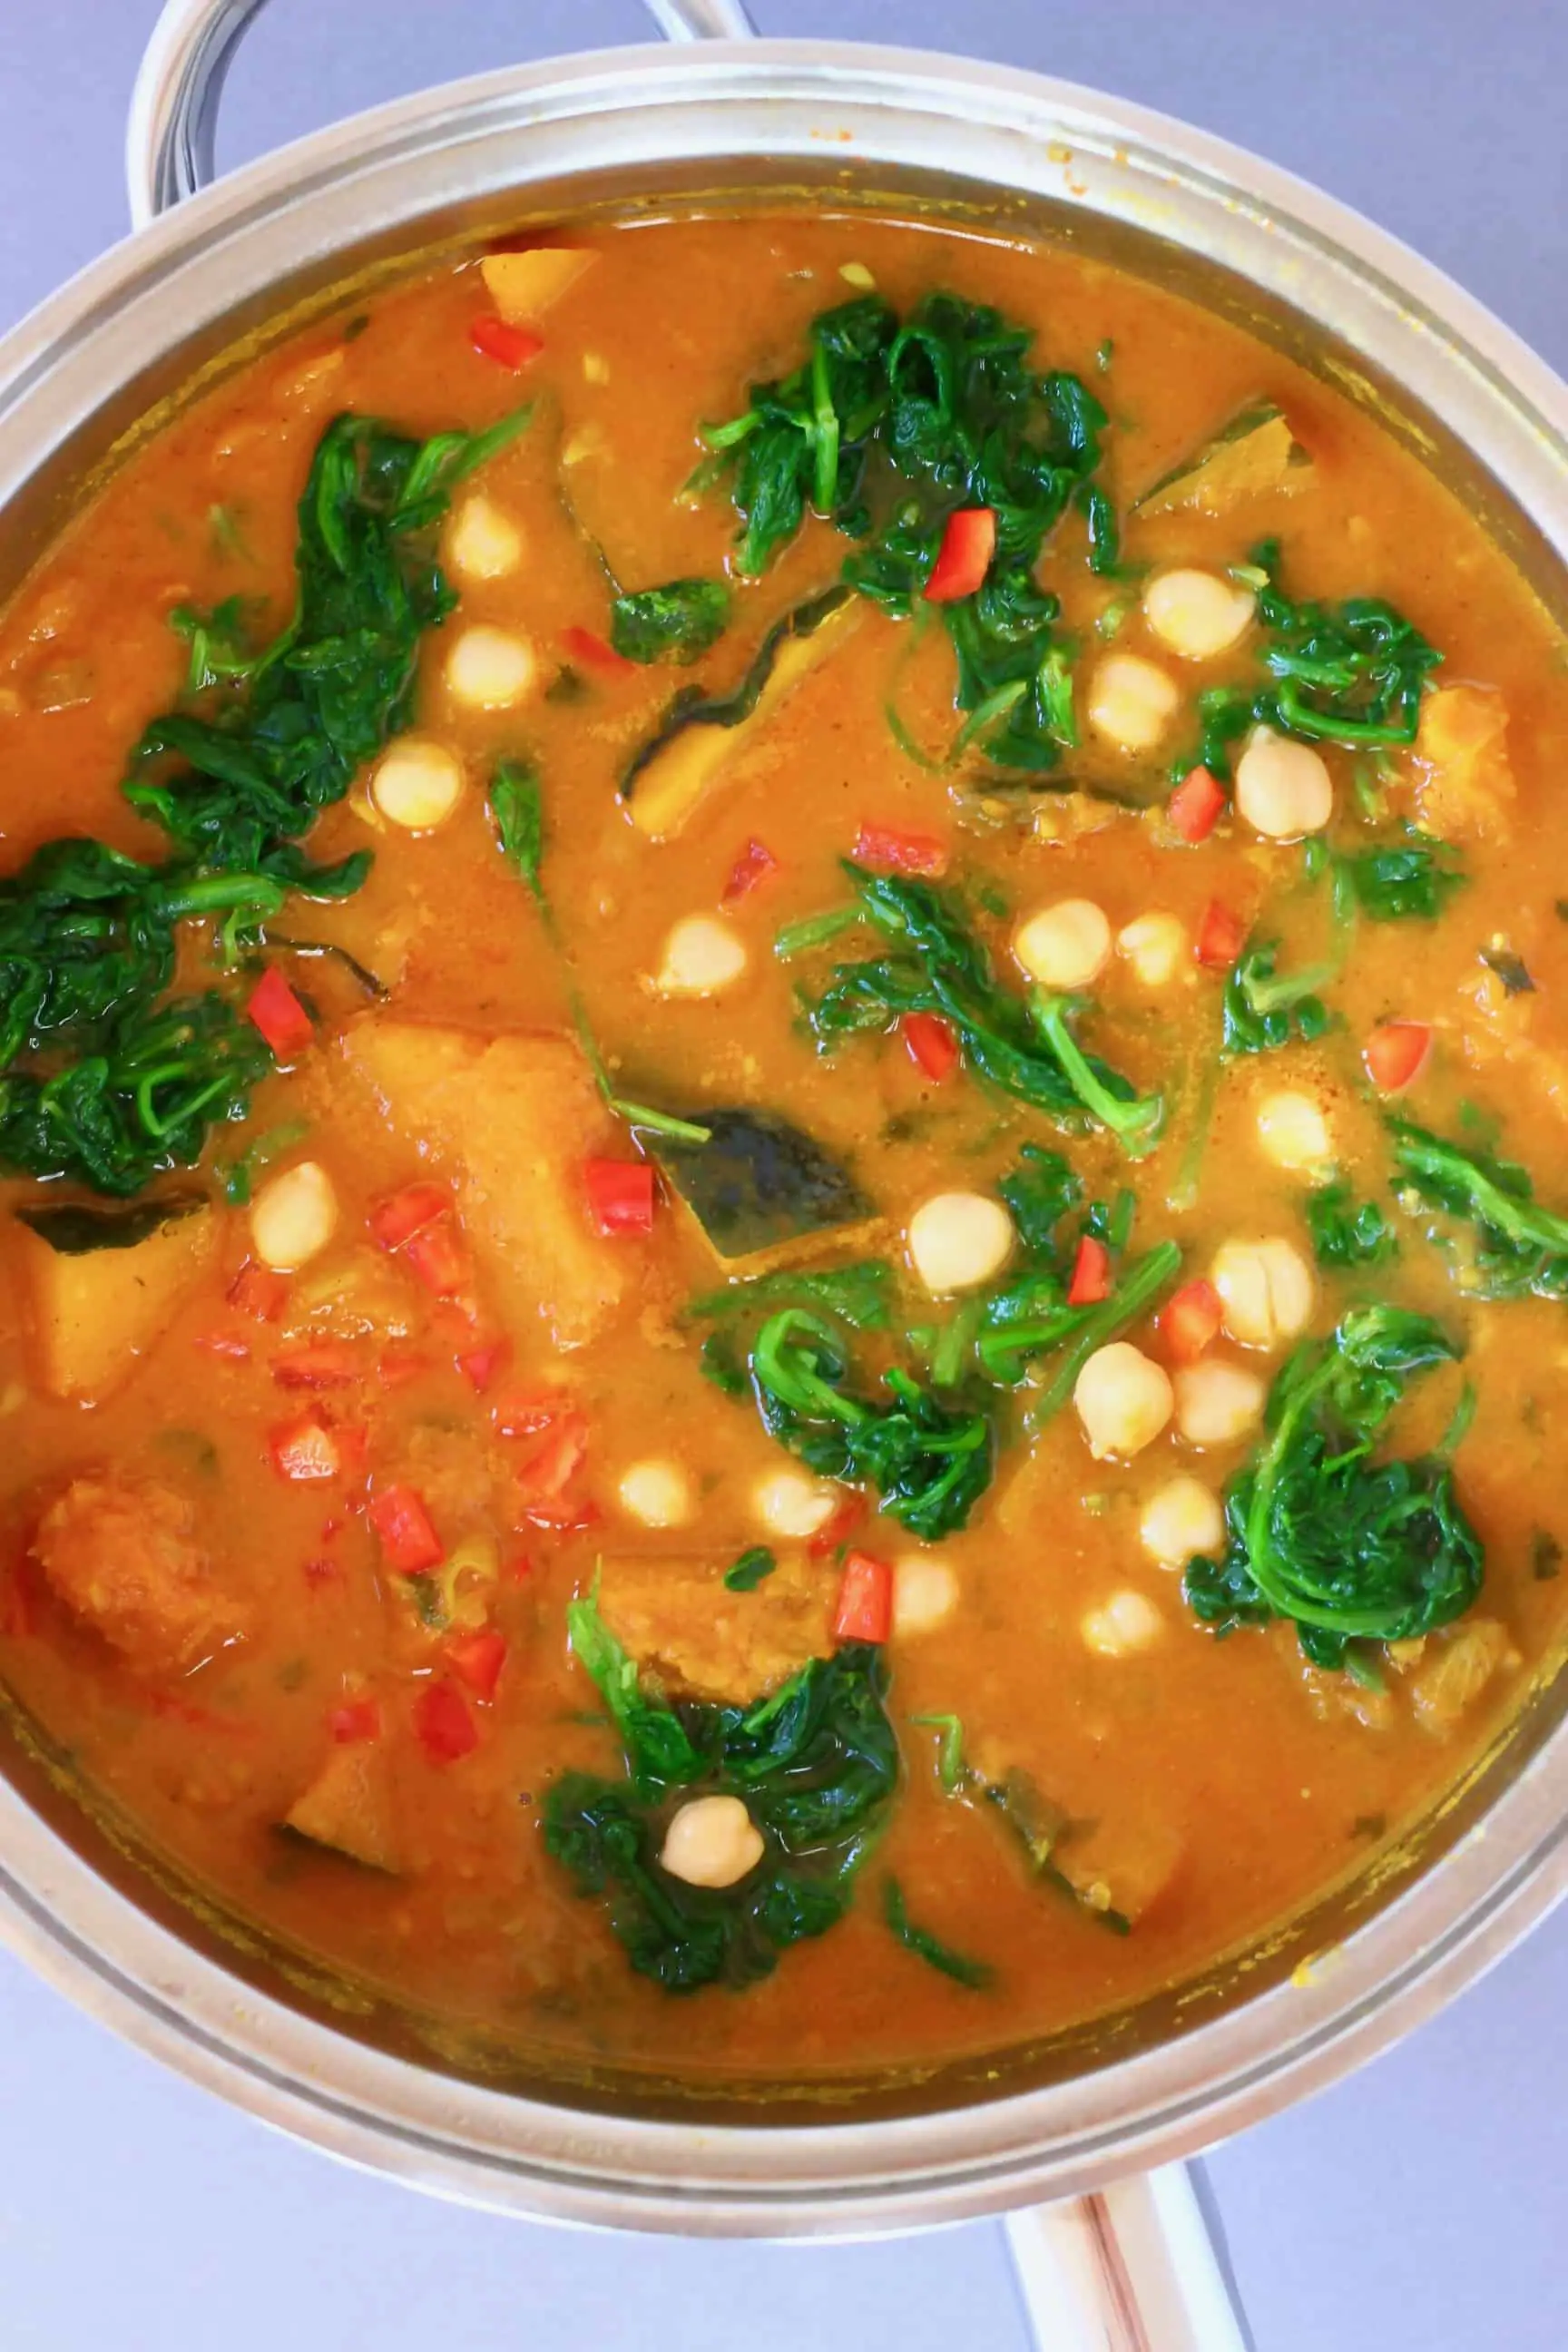 Diced pumpkin, chickpeas and spinach in a yellow curry sauce in a silver saucepan